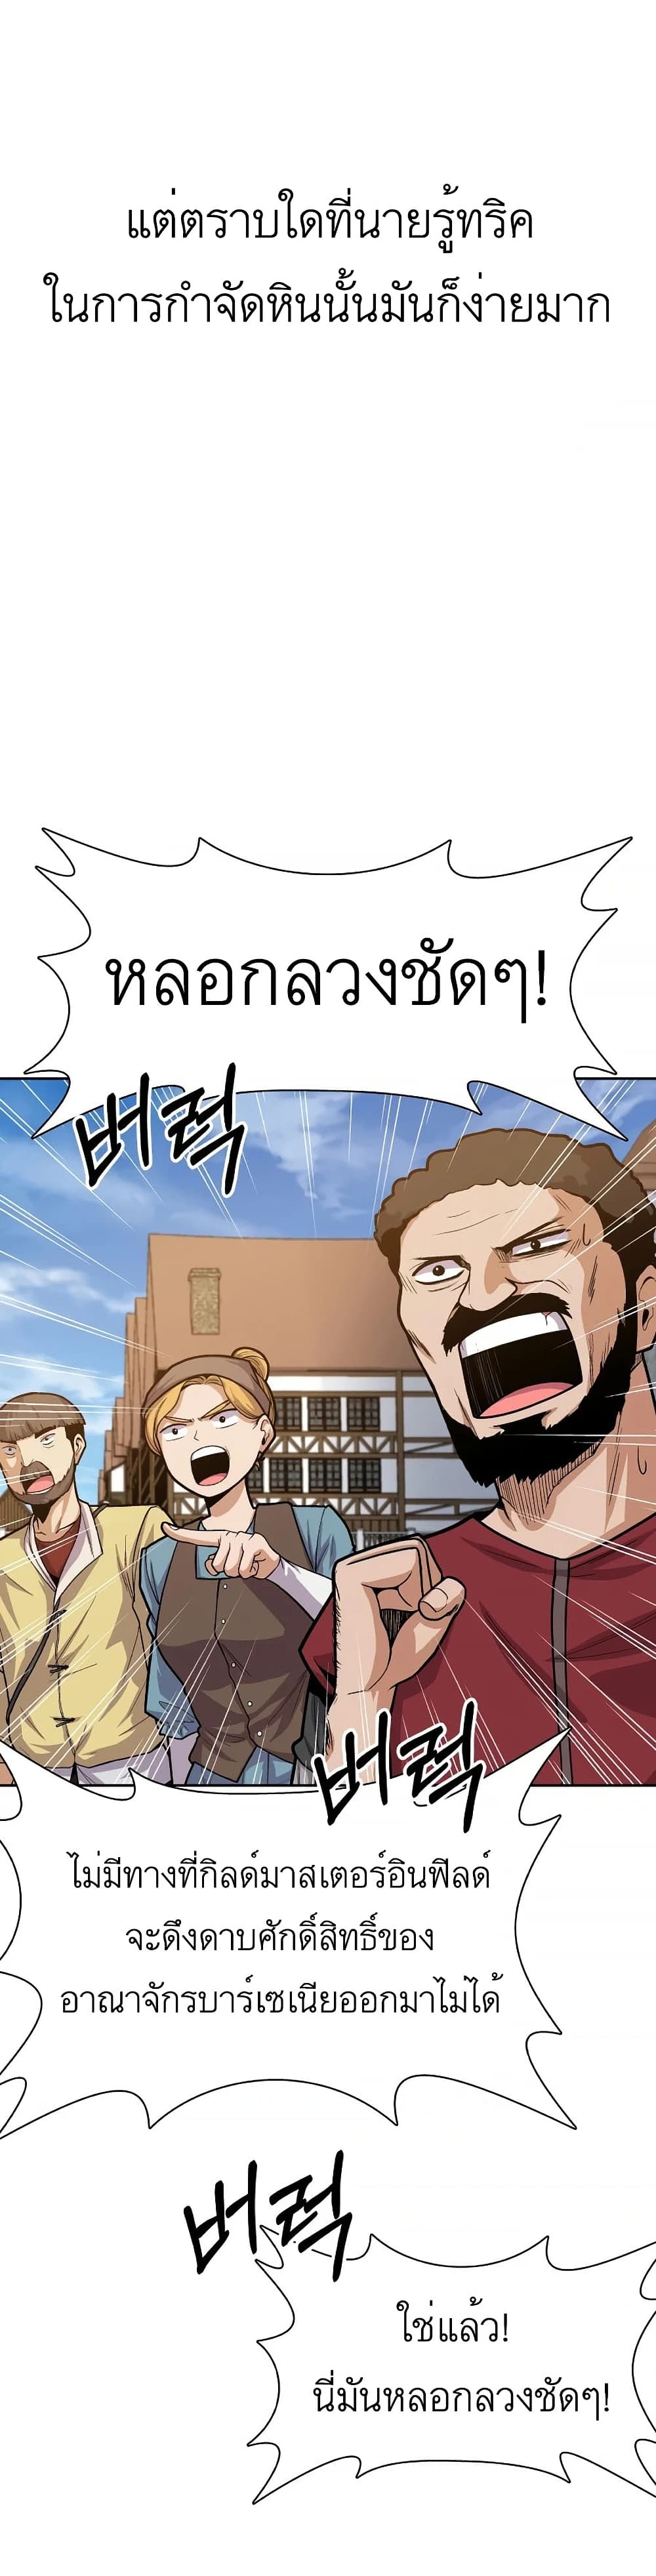 Raising Newbie Heroes In Another World ตอนที่ 13 (7)